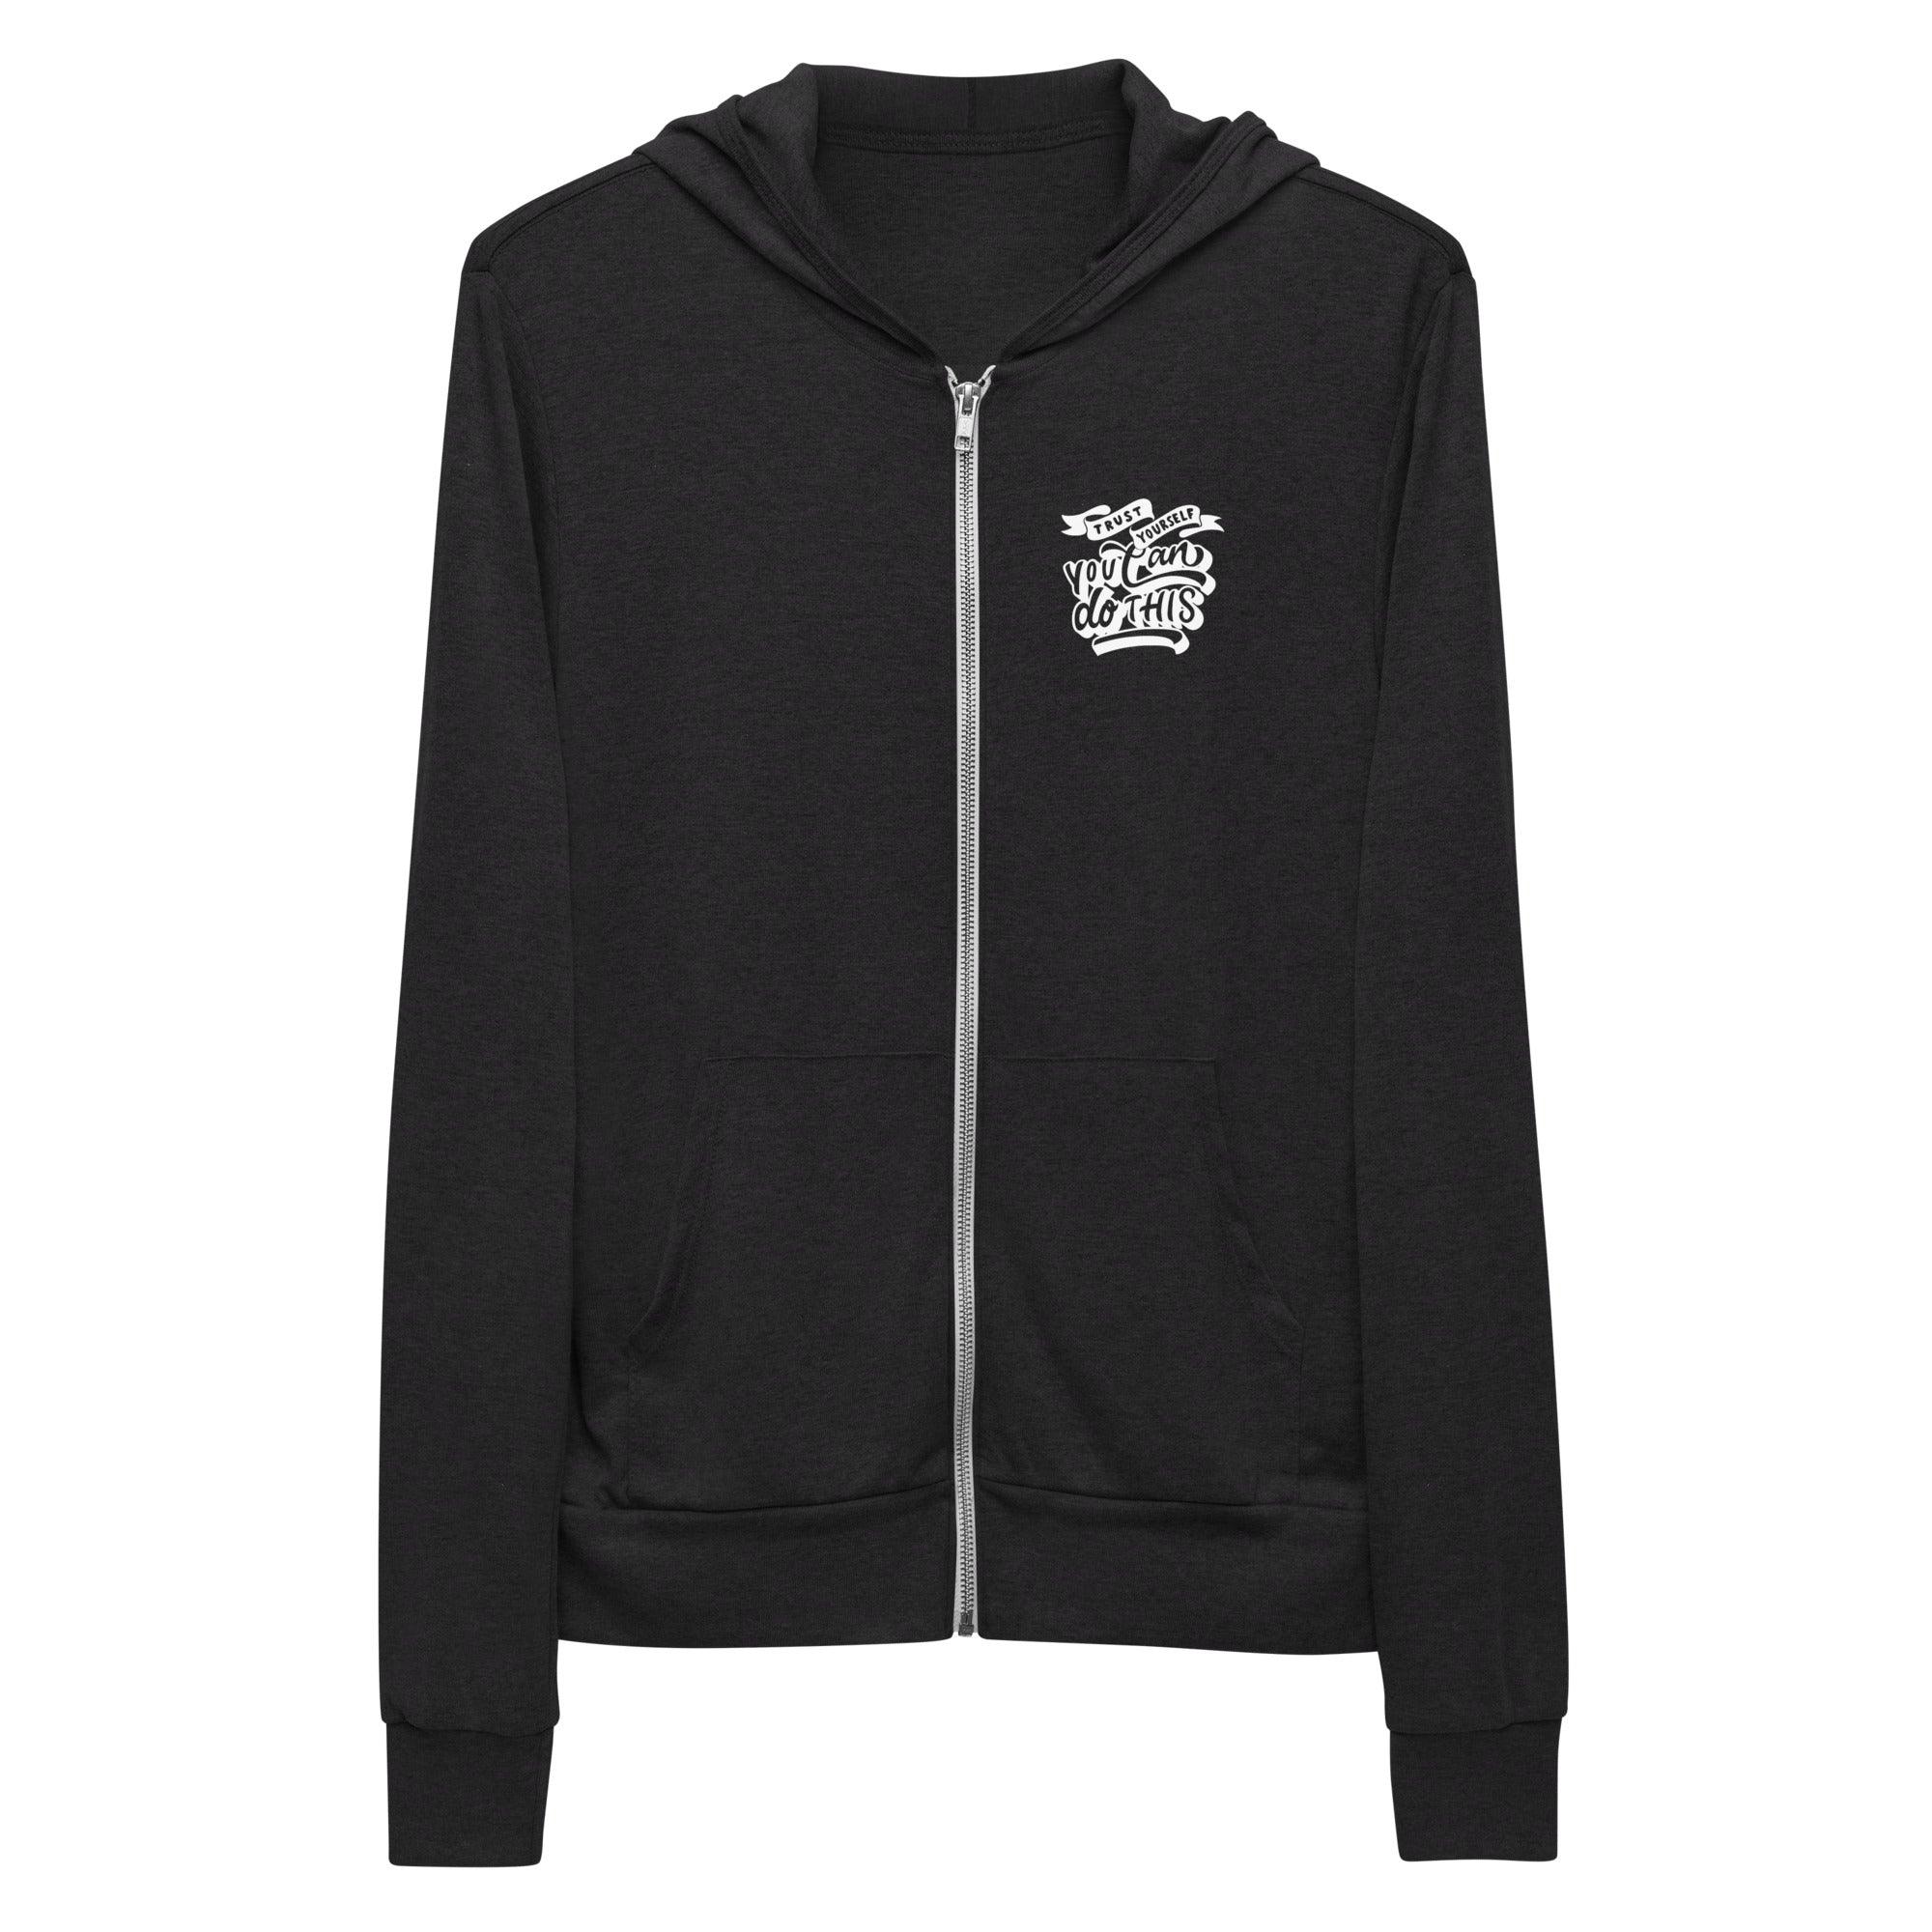 You Can Do This, Unisex Zip Hoodie | Positive Affirmation Clothing - Affirm Effect